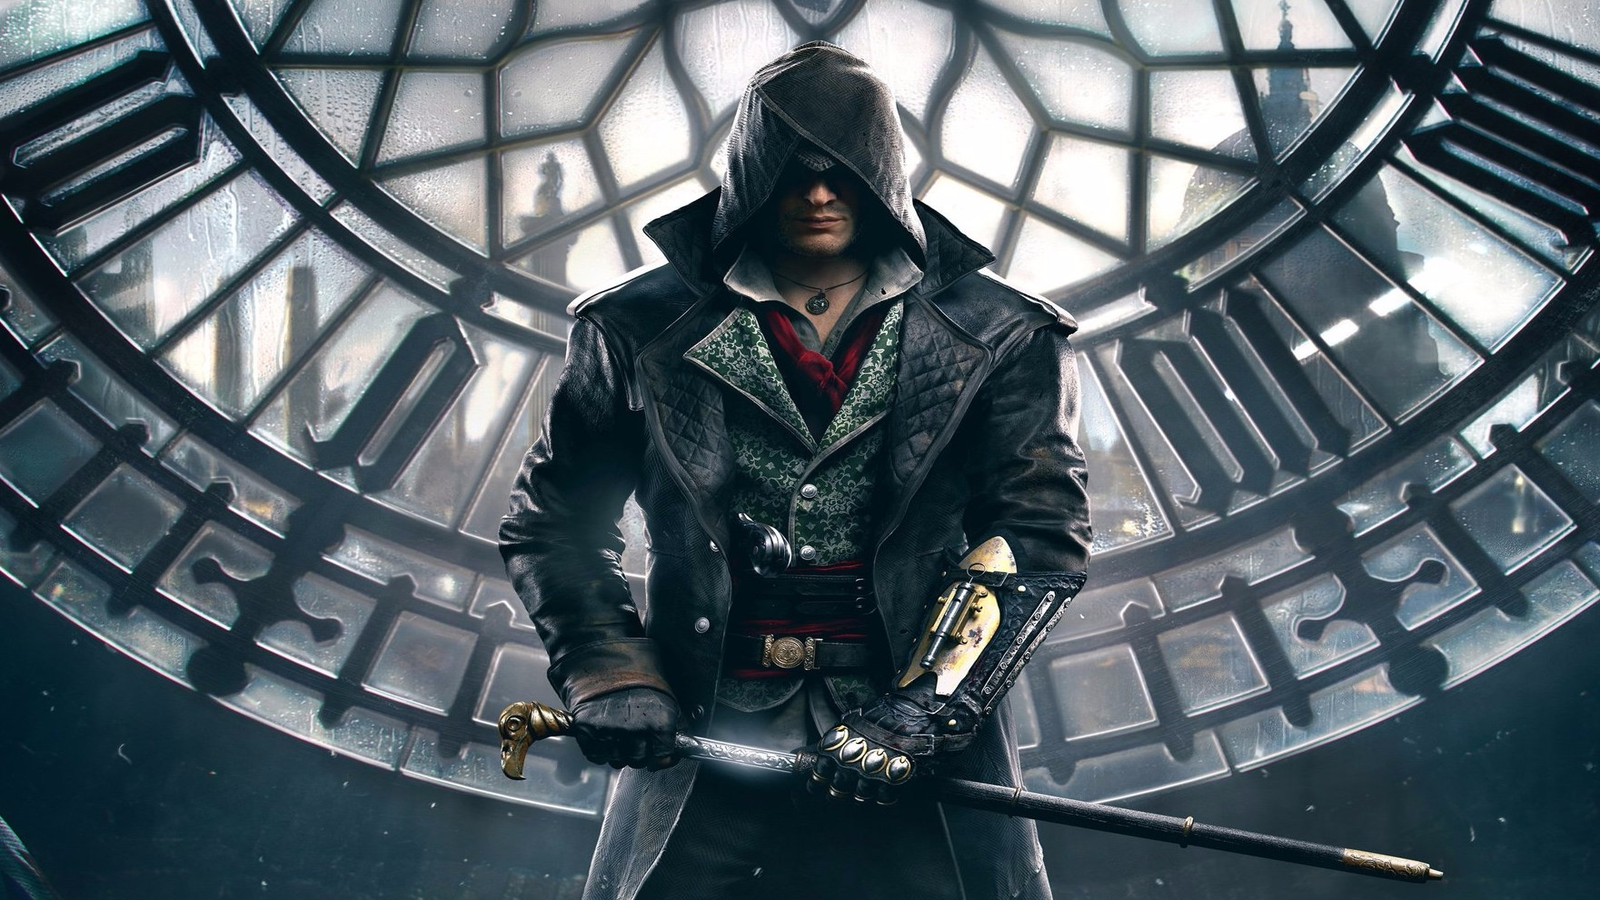 Assassin's Creed: Unity - PC Performance Analysis